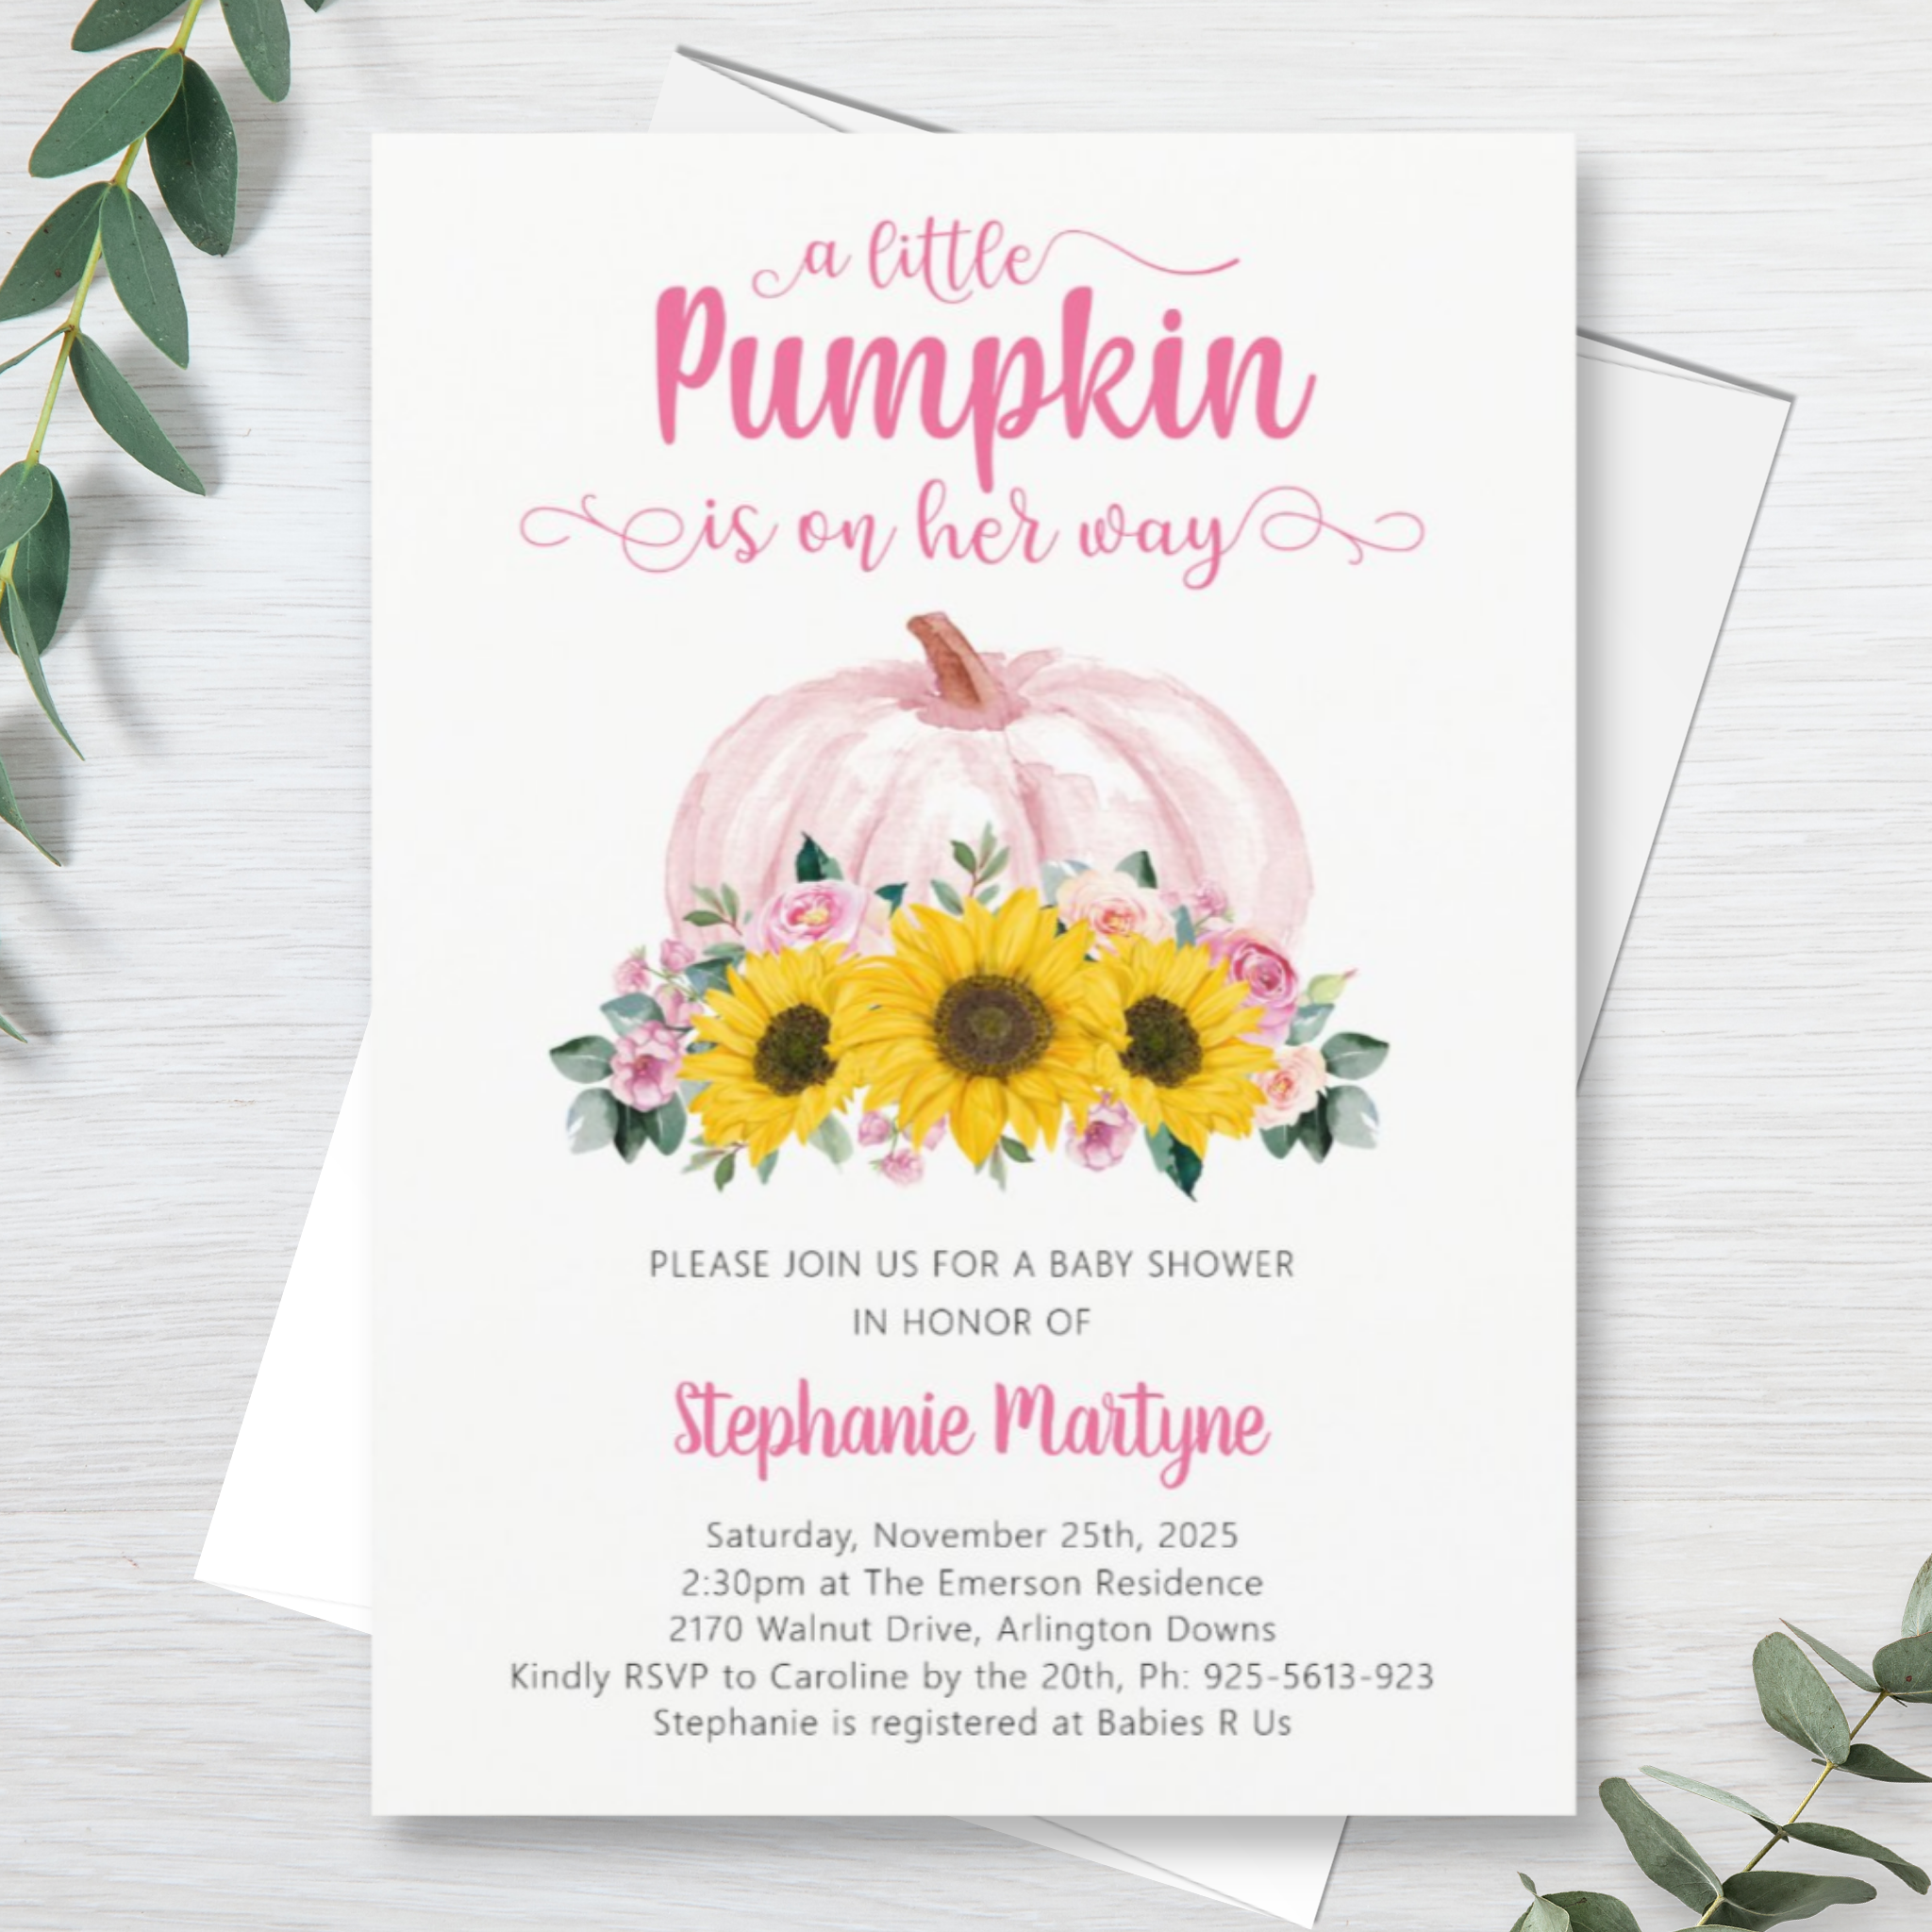 Pumpkin baby shower invitations with watercolor sunflowers and pink flowers.